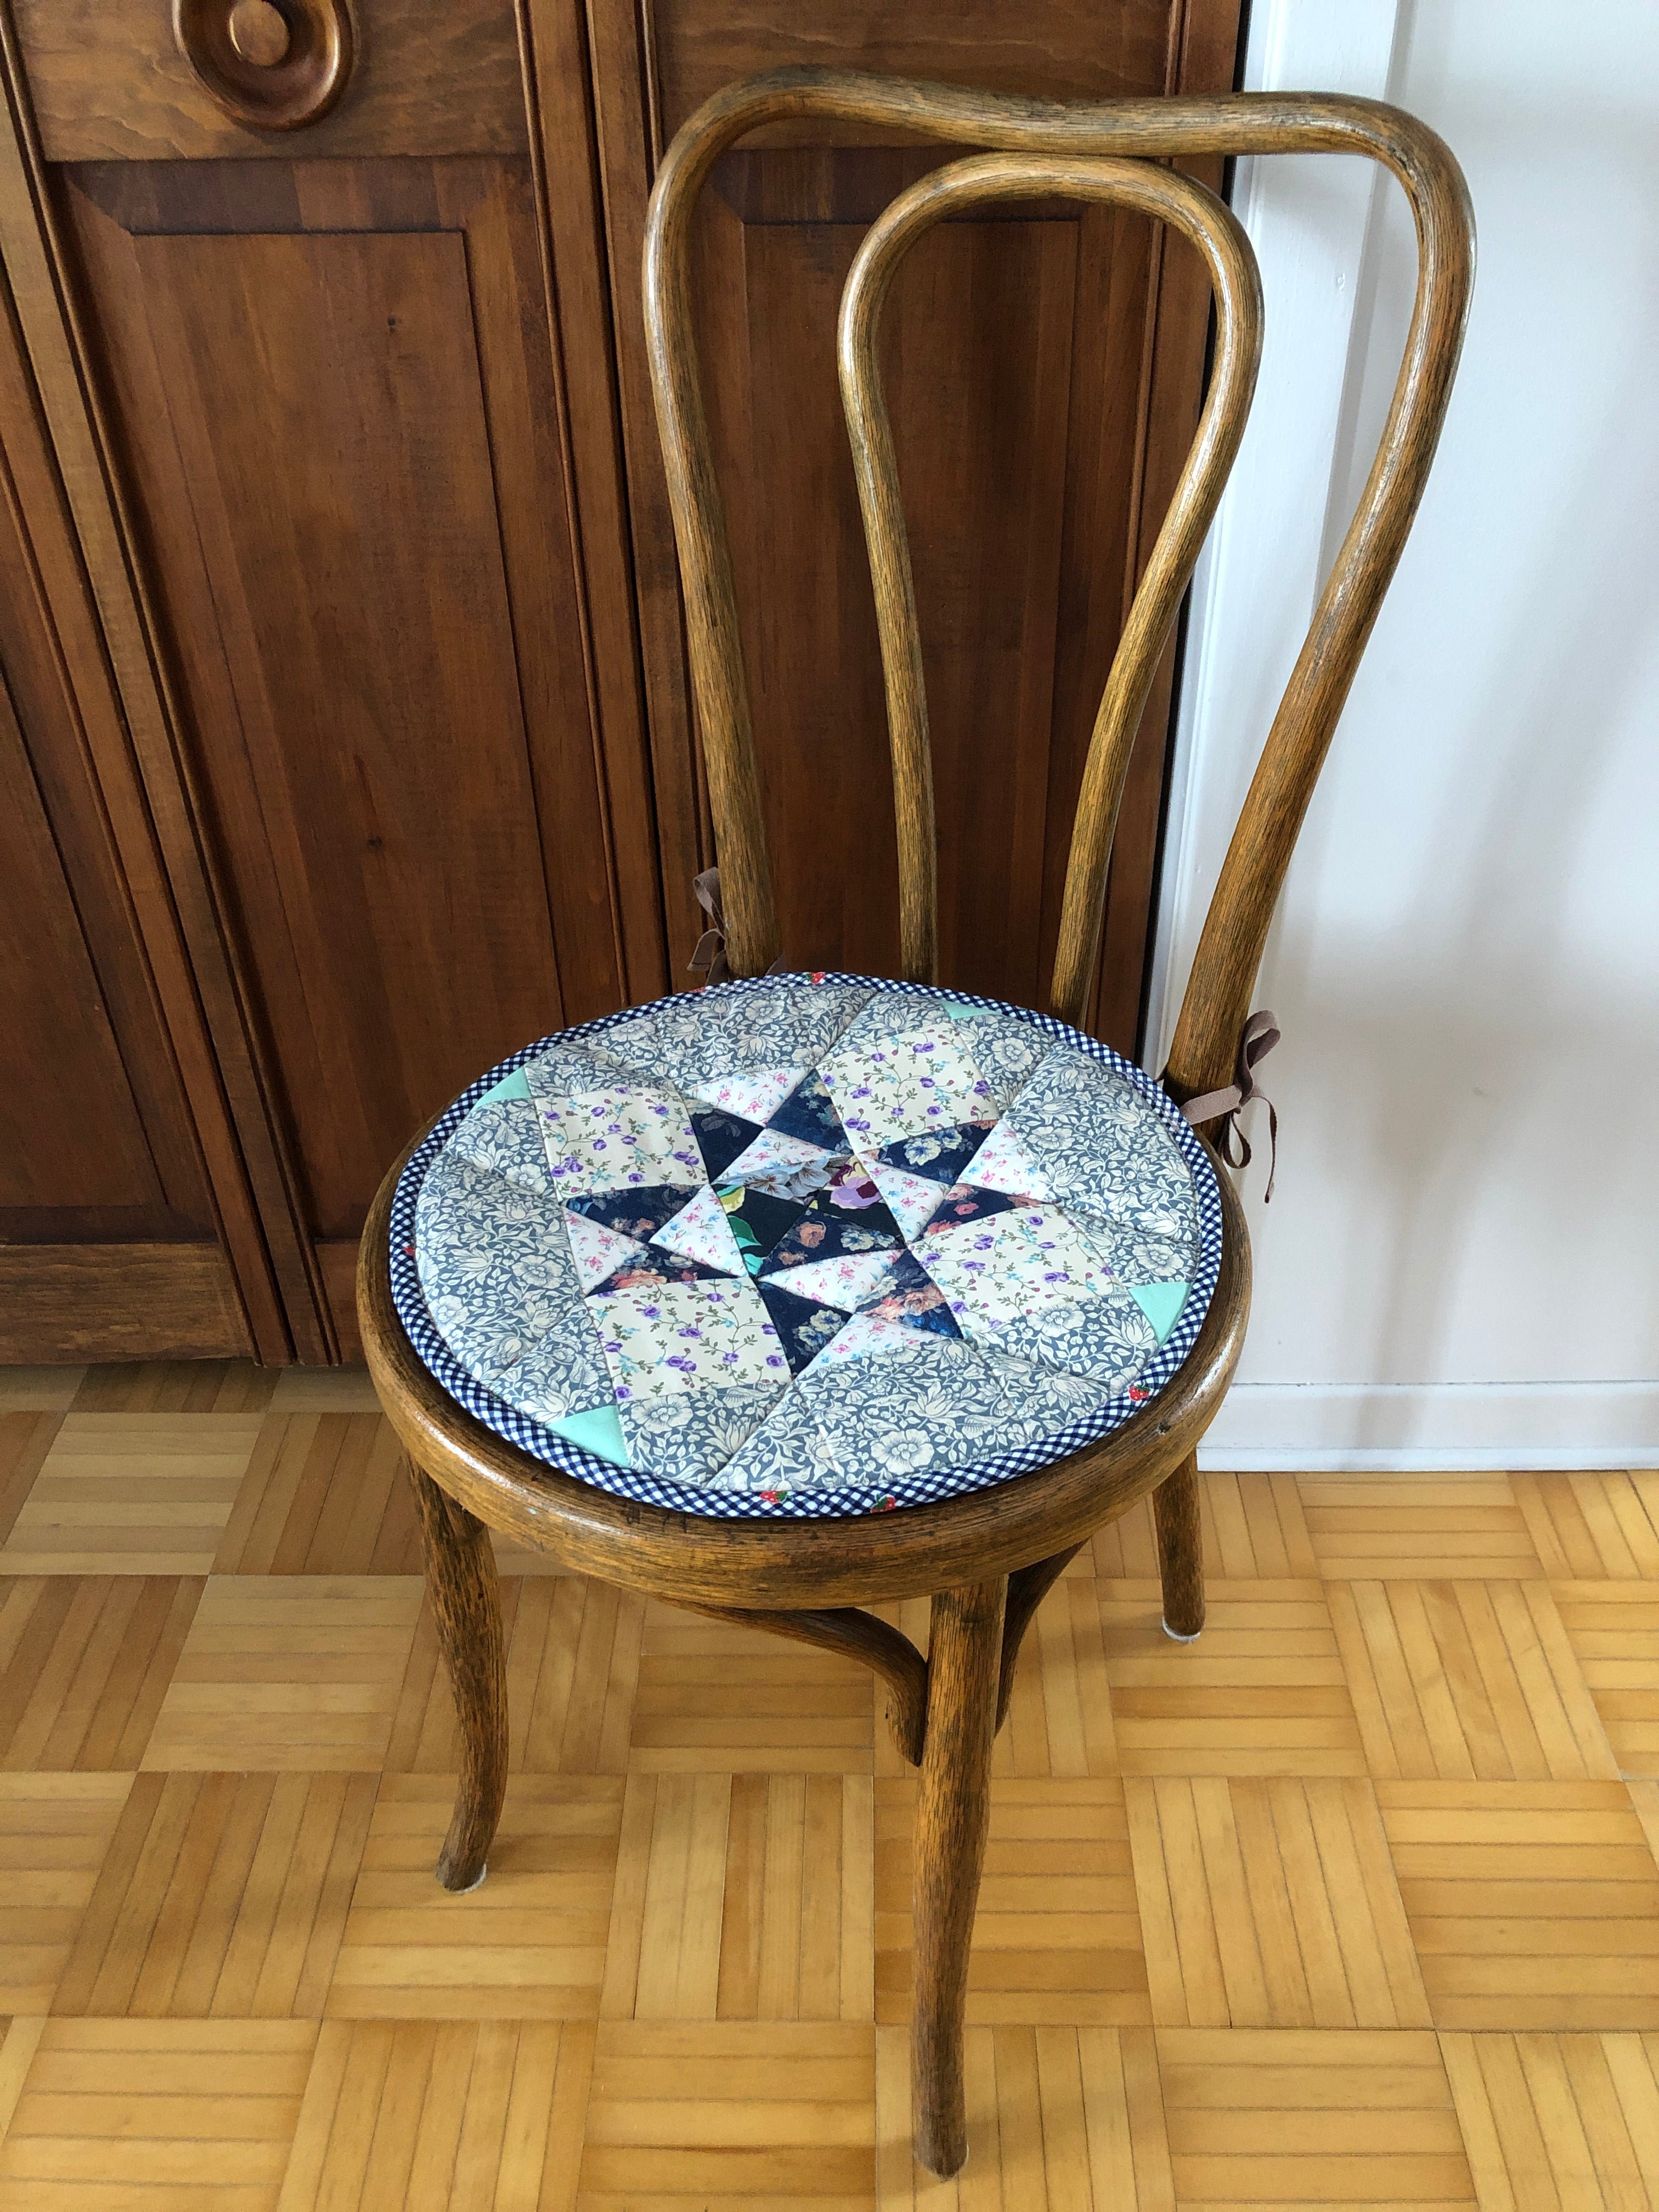 Blue Star Patchwork Chair Pad with Jacquard Backing